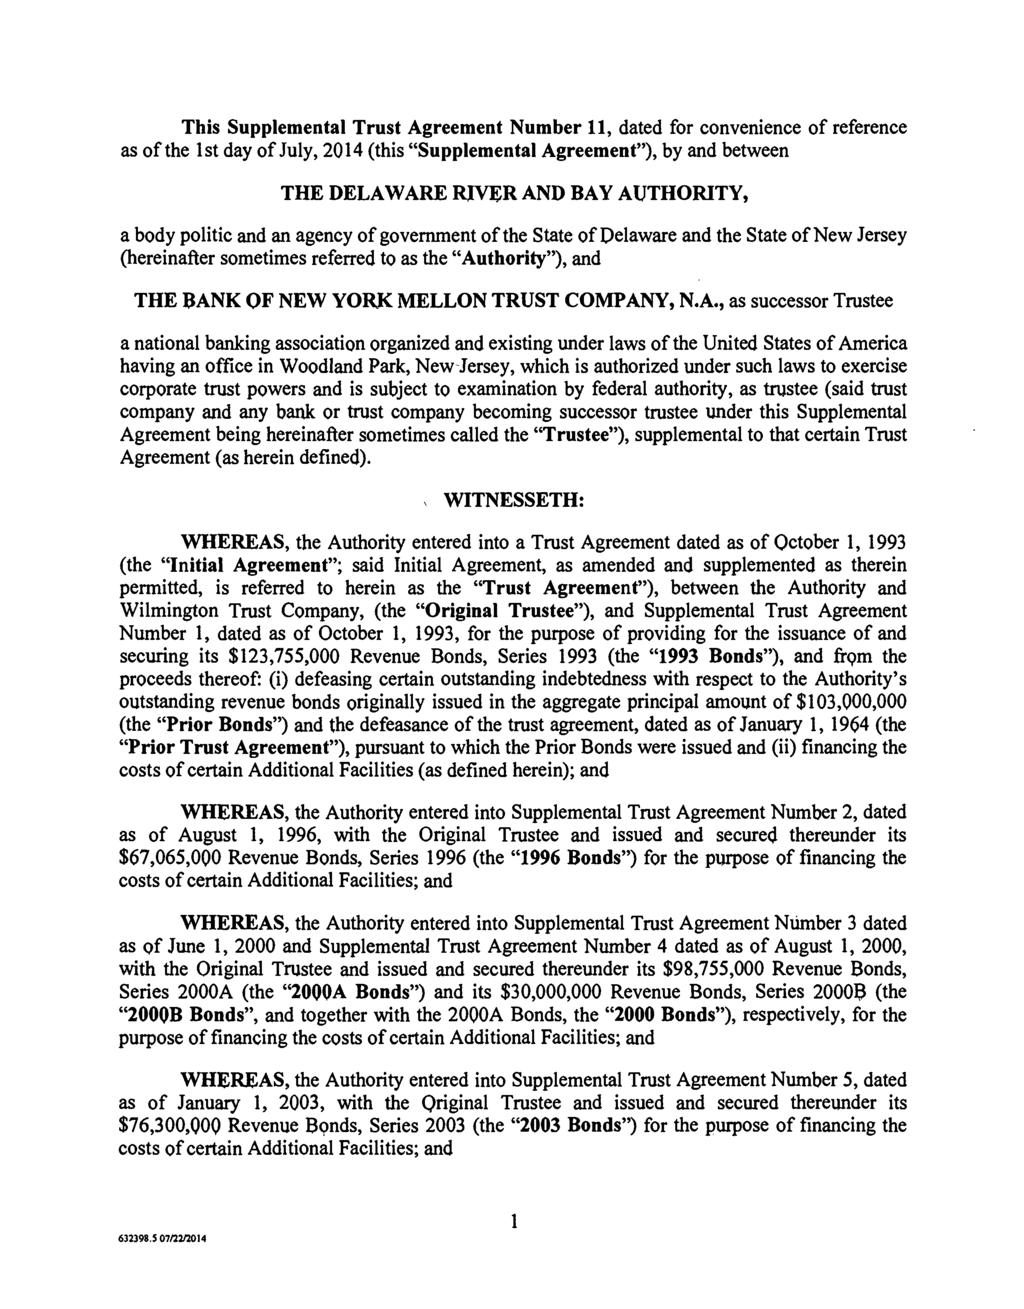 This Supplemental Trust Agreement Number 11, dated for convenience of reference as of the 1st day of July, 2014 (this "Supplemental Agreement "), by and between THE DELAWARE RIVER AND BAY AUTHORITY,